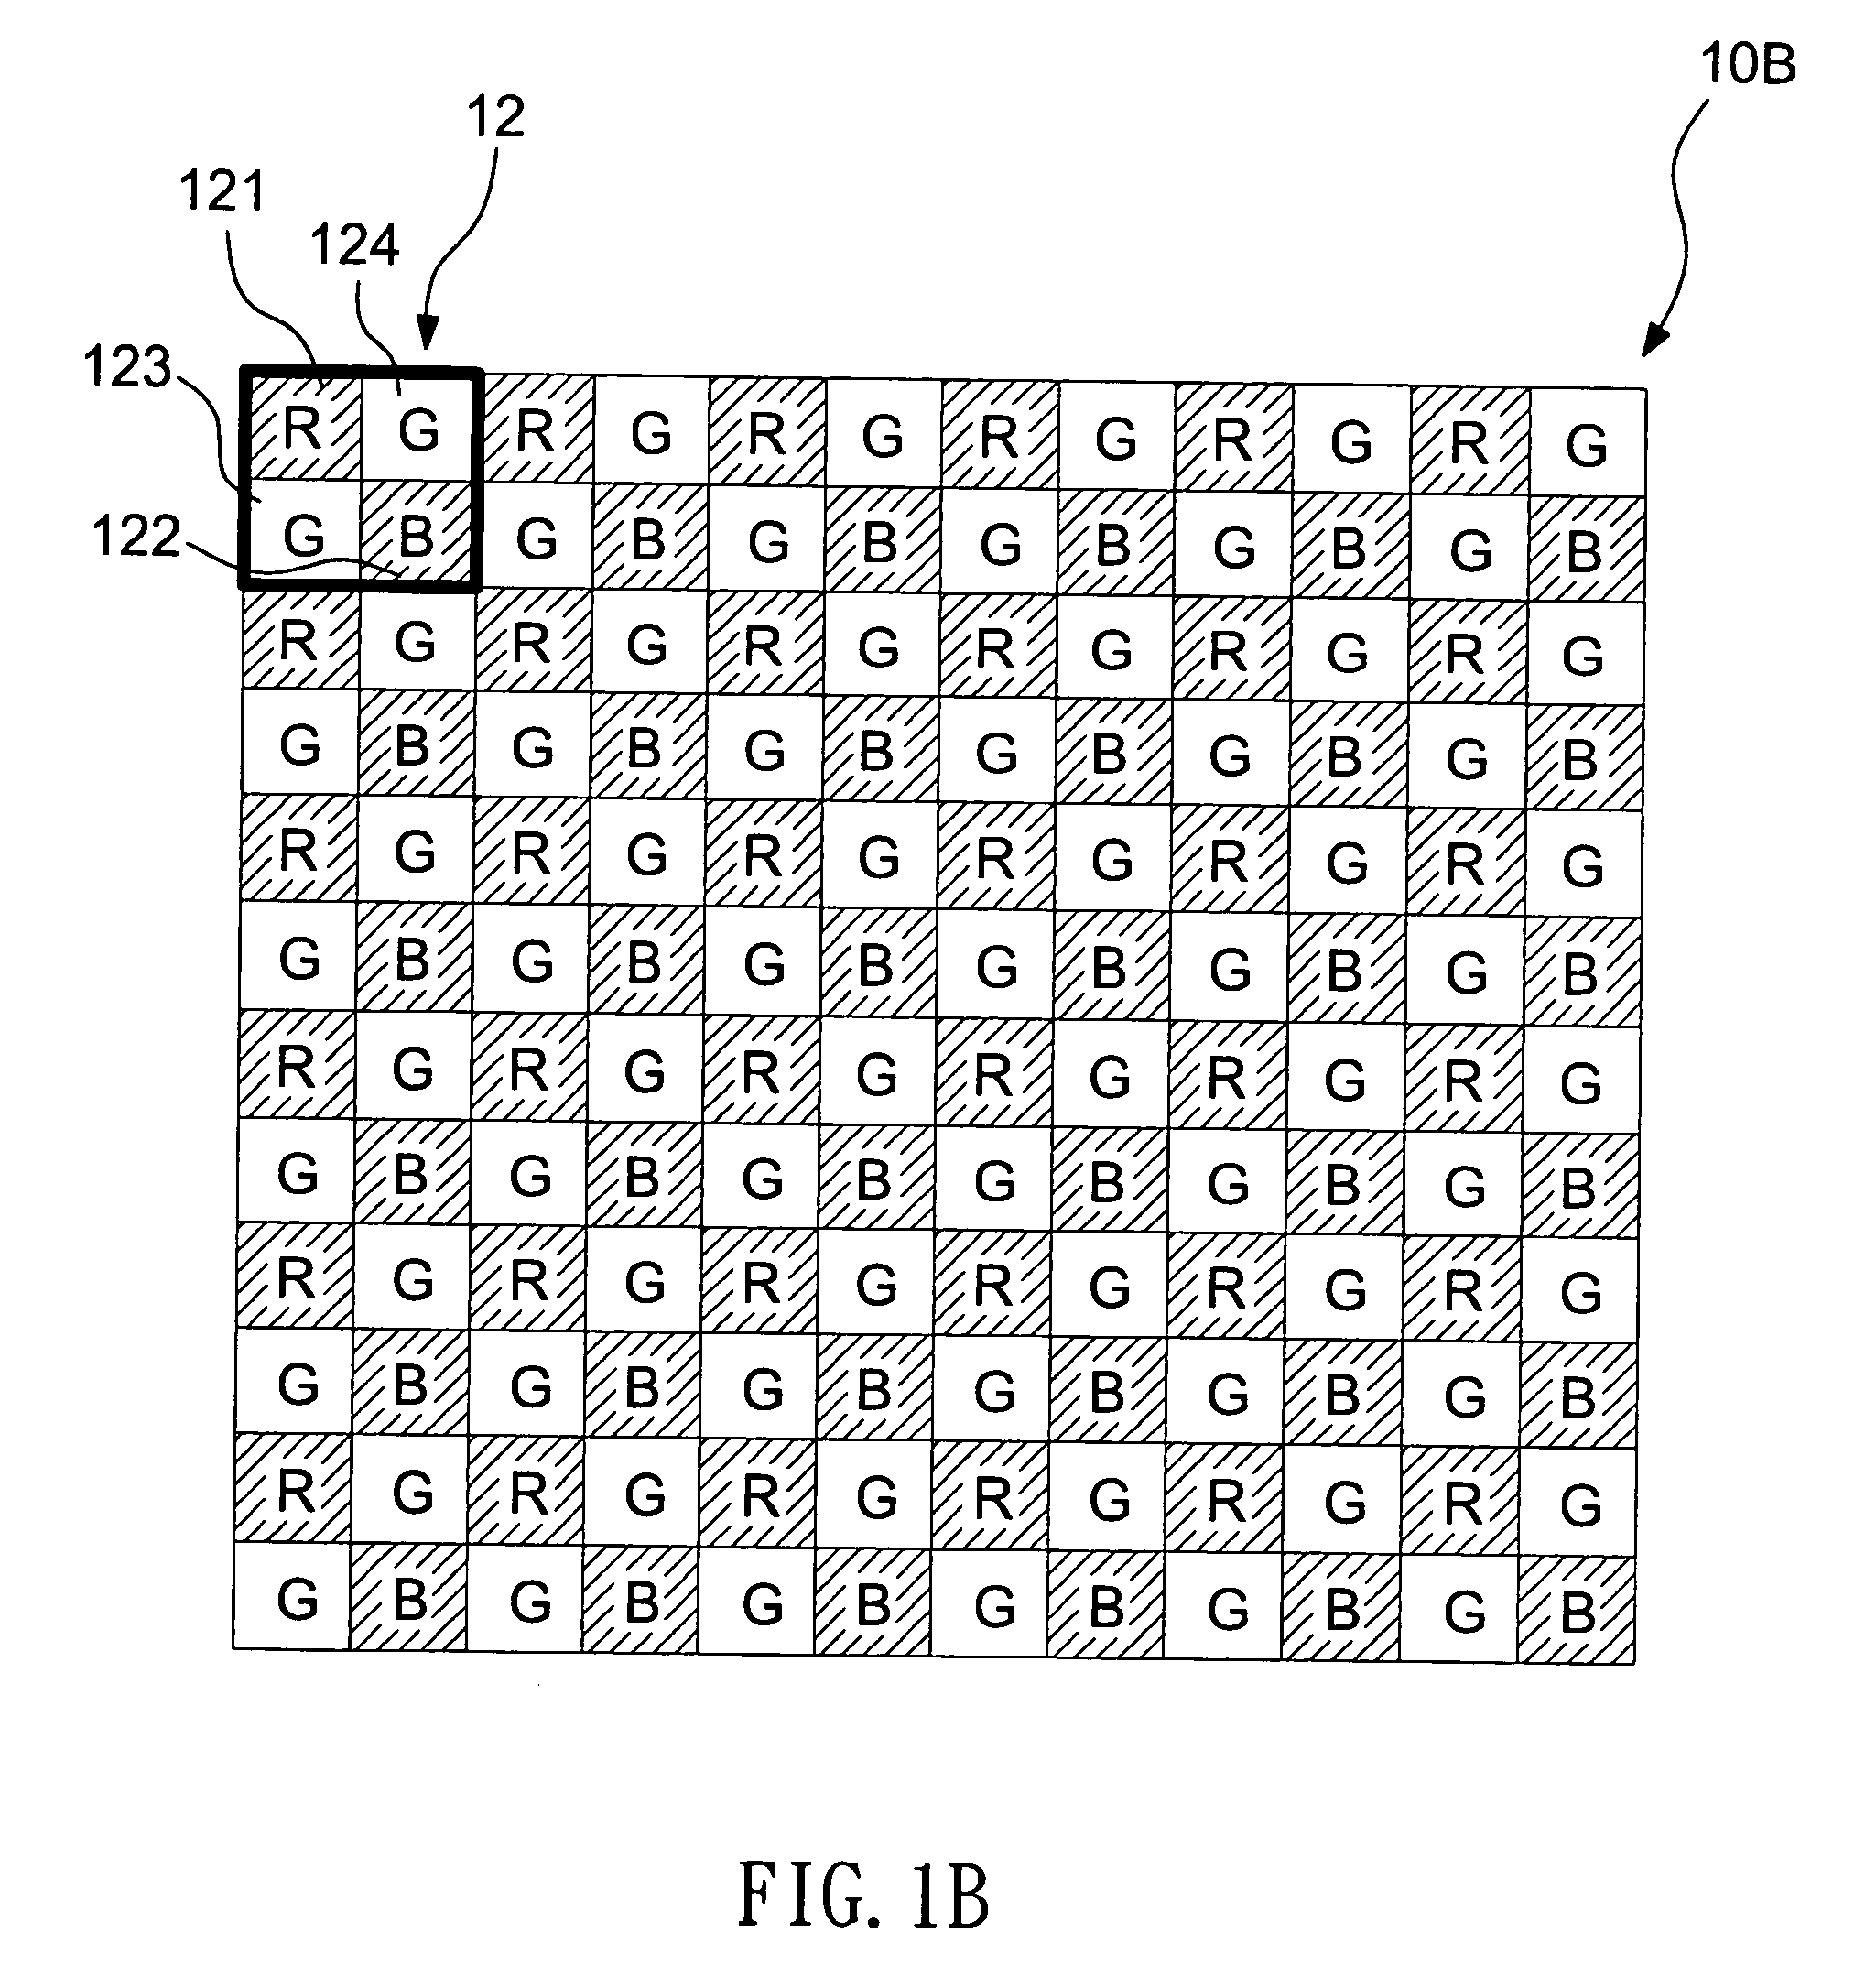 Display and weighted dot rendering method